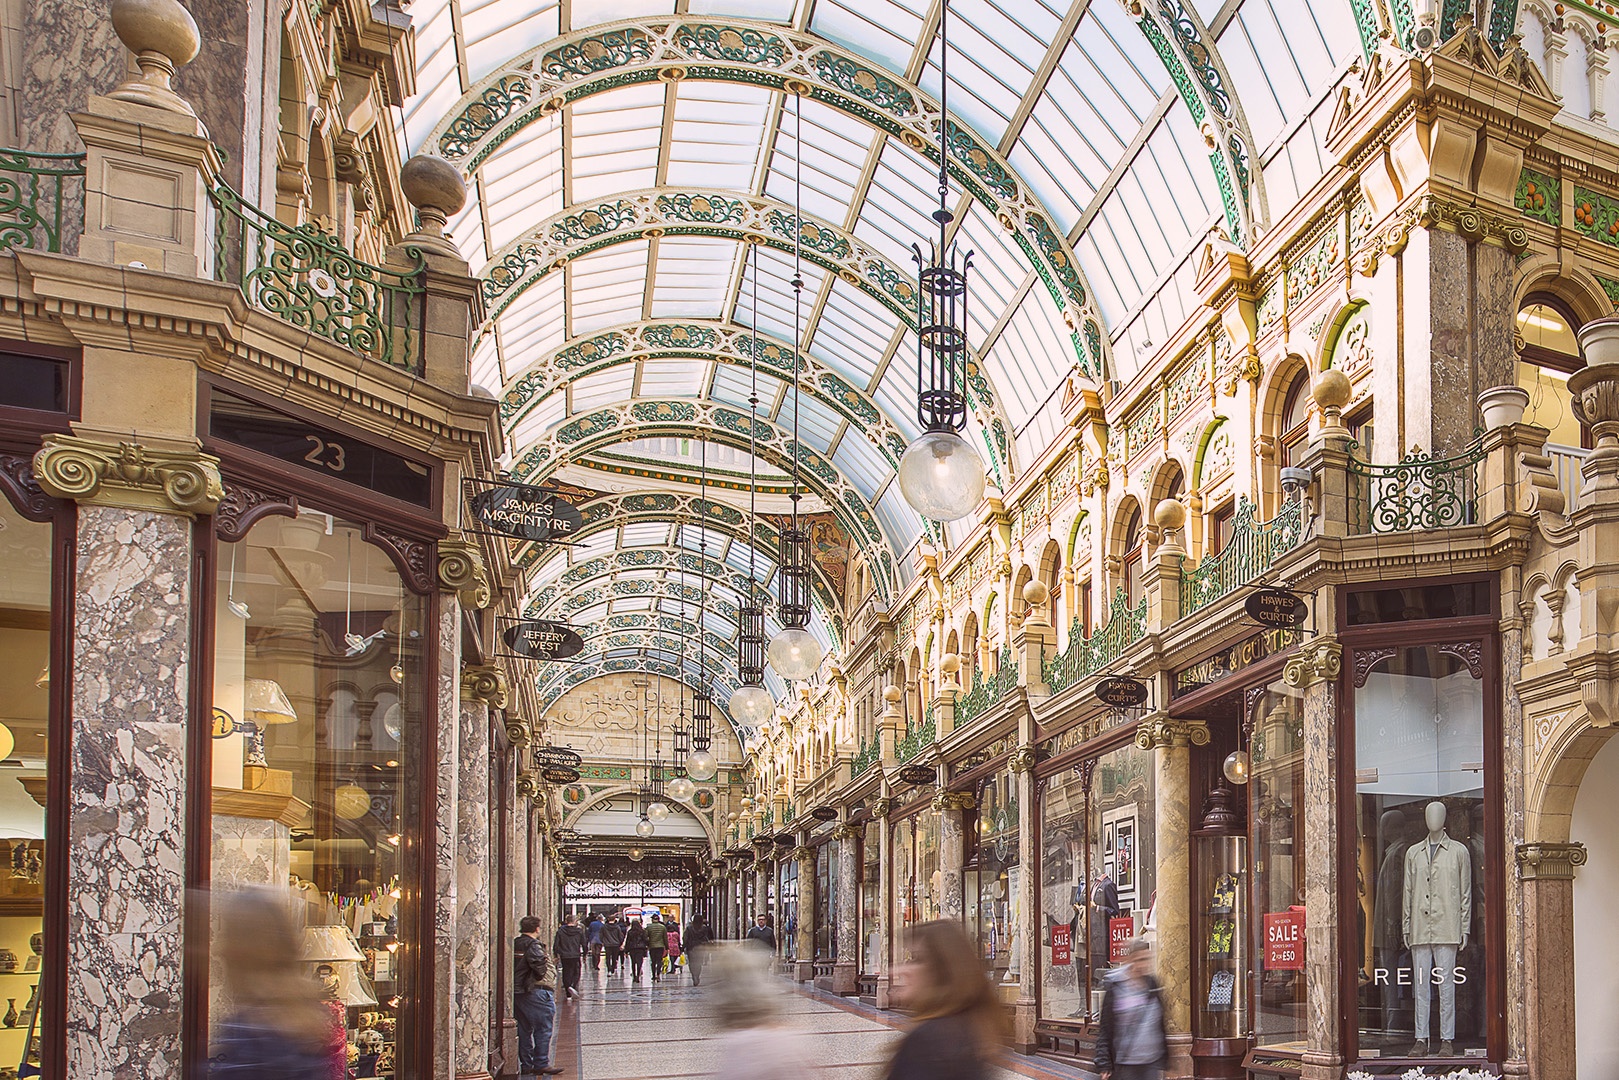 Interior view of Victoria Arcade in Leeds showing beautiful ornate architecture and glass ceiling